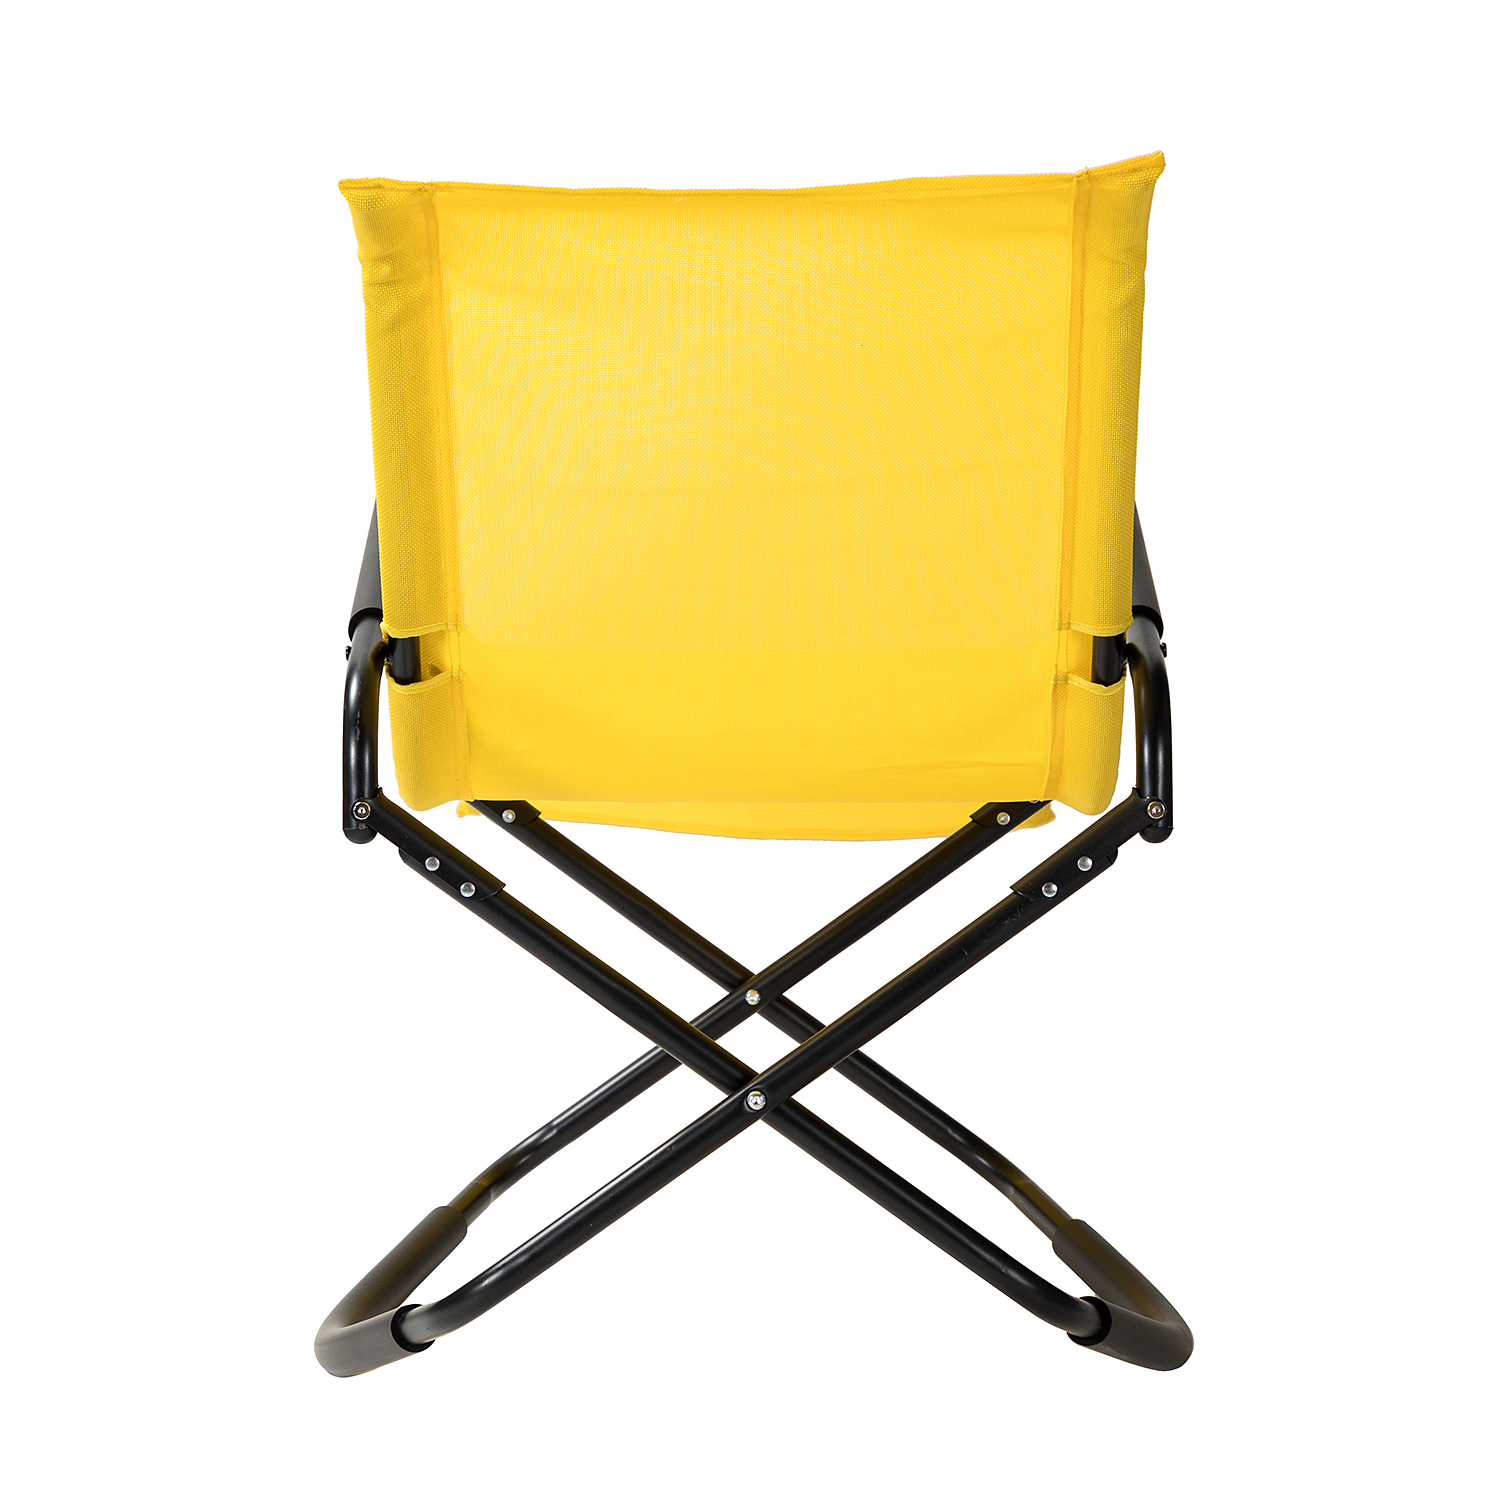 Folding Lounge Chair, Patio Rocking Chaise Chair with Armrests, Beach Lightweight Reclining Chair, Outdoor Portable Folding Chair, Lounge Chaise Chair for Camping, Pool, Lawn, Garden, D7837 - image 4 of 9